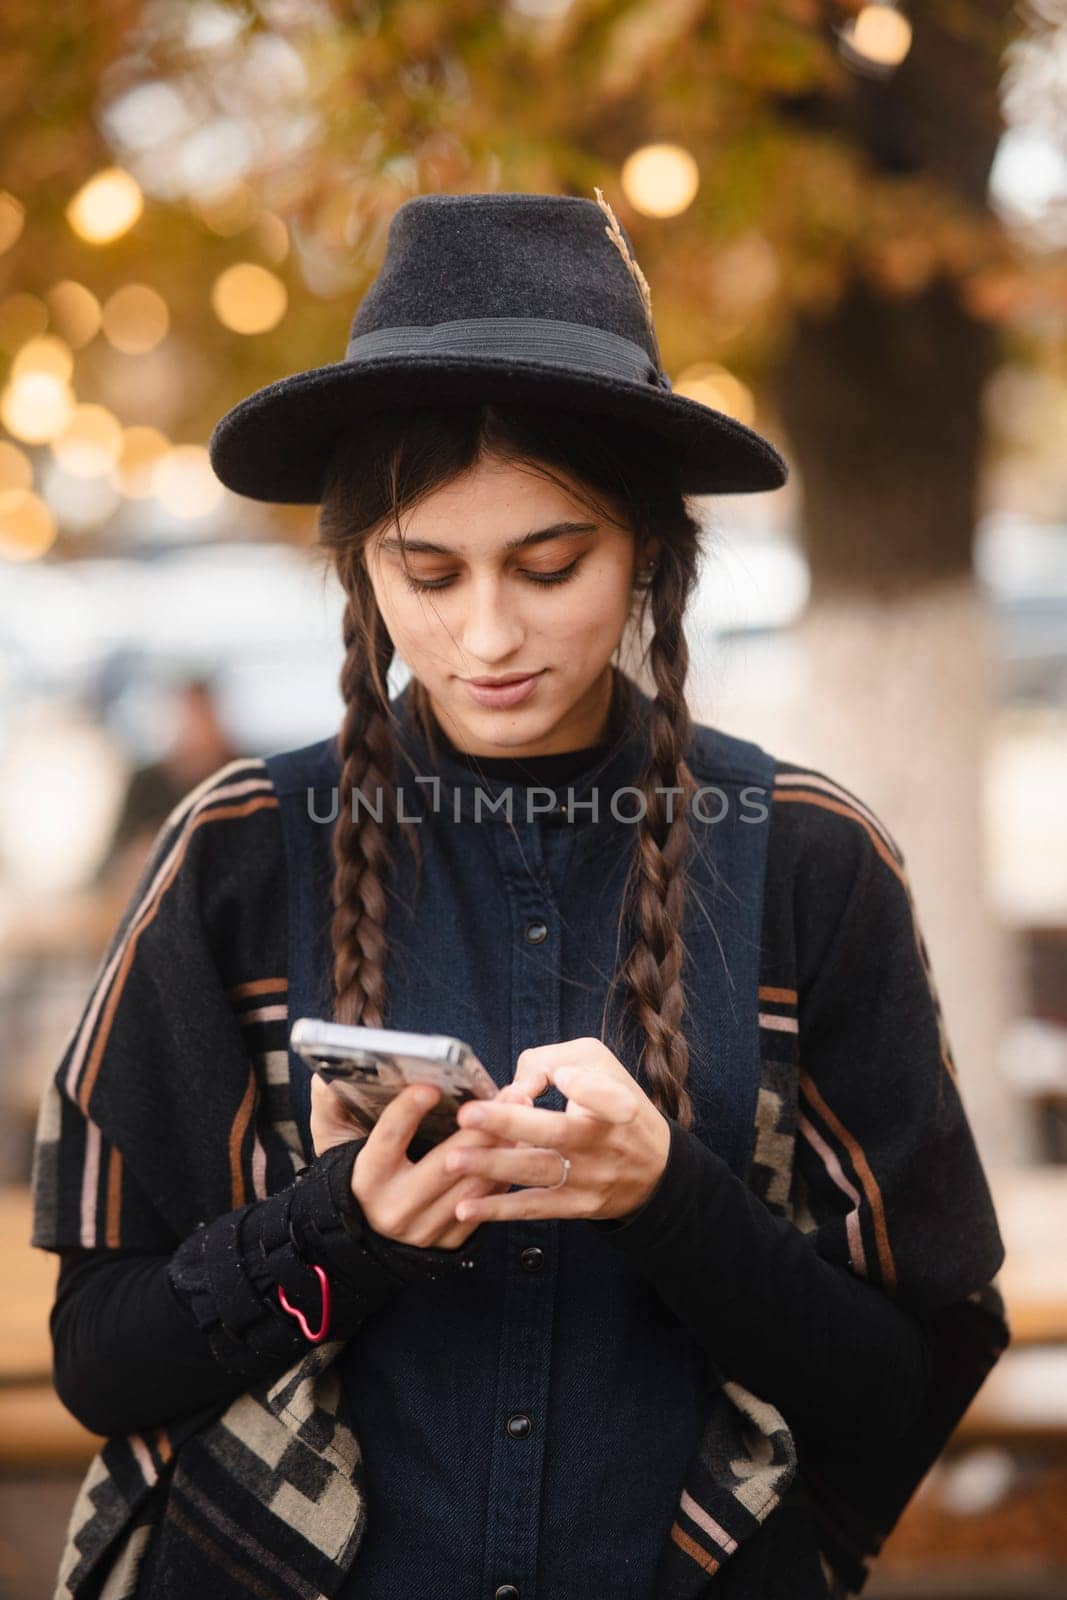 A stylish and radiant girl, wearing a black hat and a braided hairstyle. High quality photo